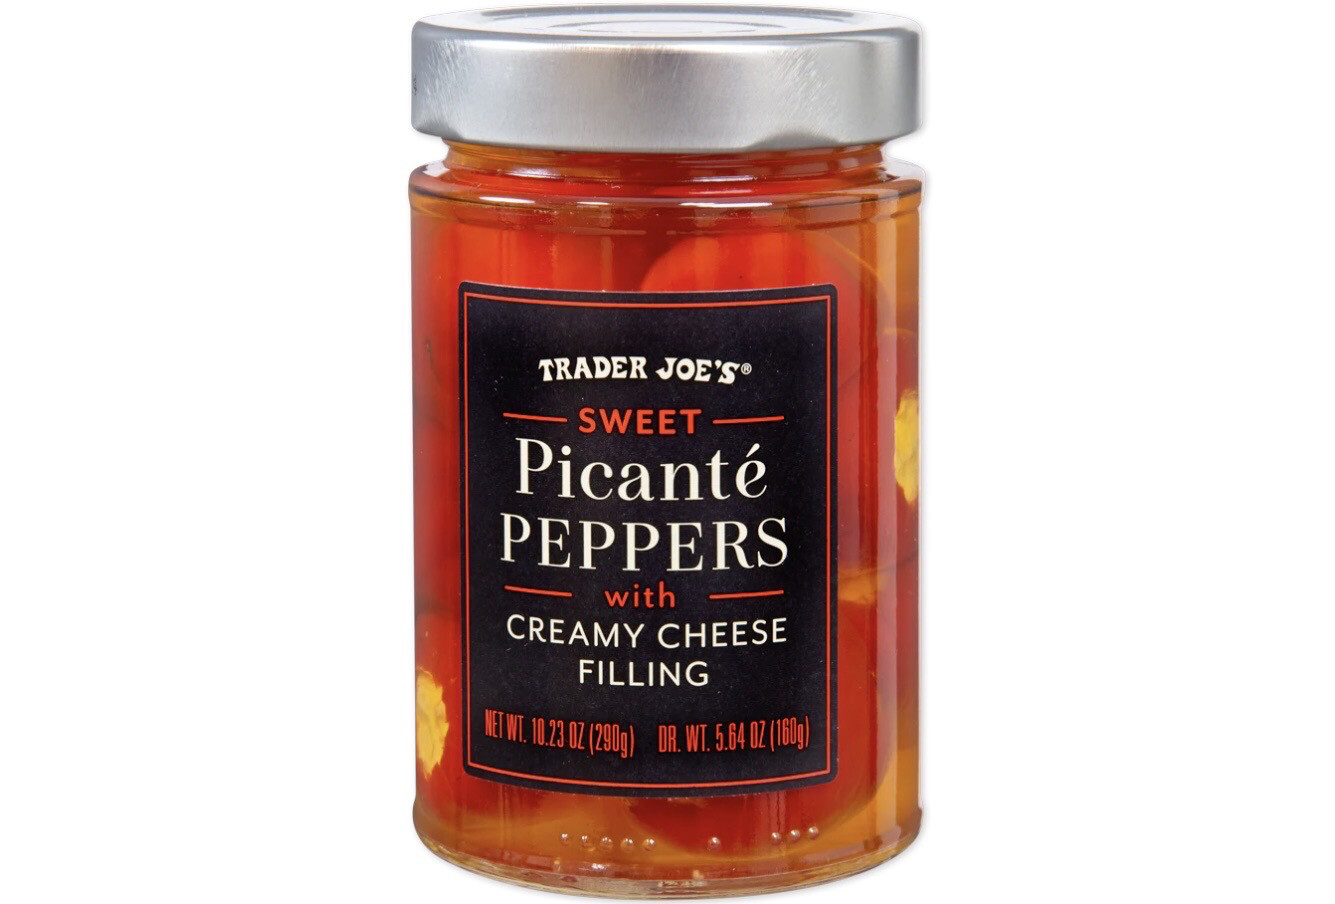 Trader Joe’s Sweet Picante Peppers with Creamy Cheese Filling 